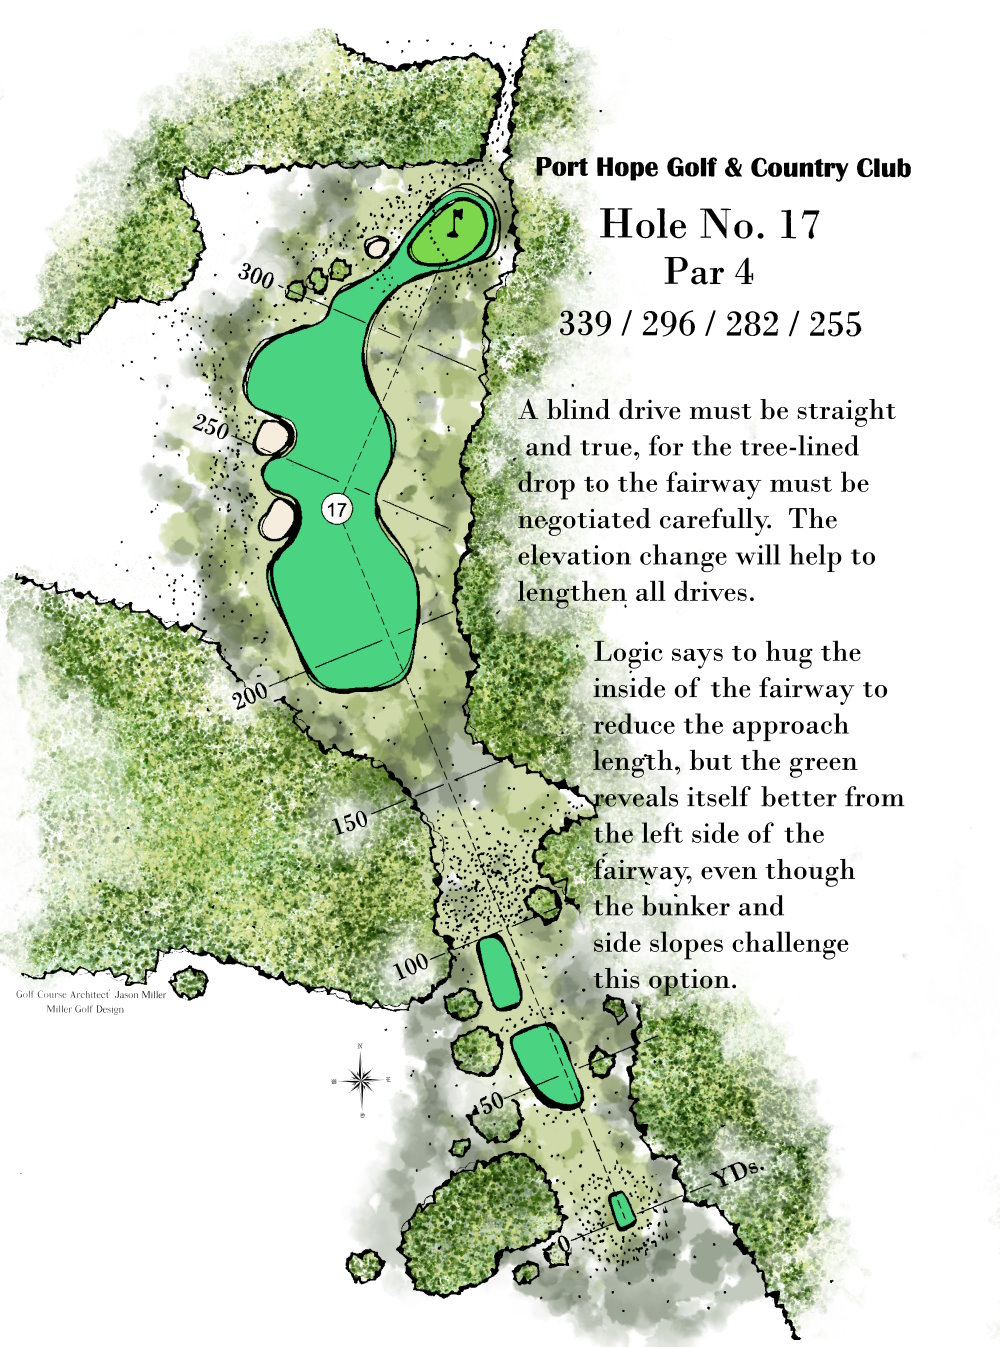 Rendering of Hole 17